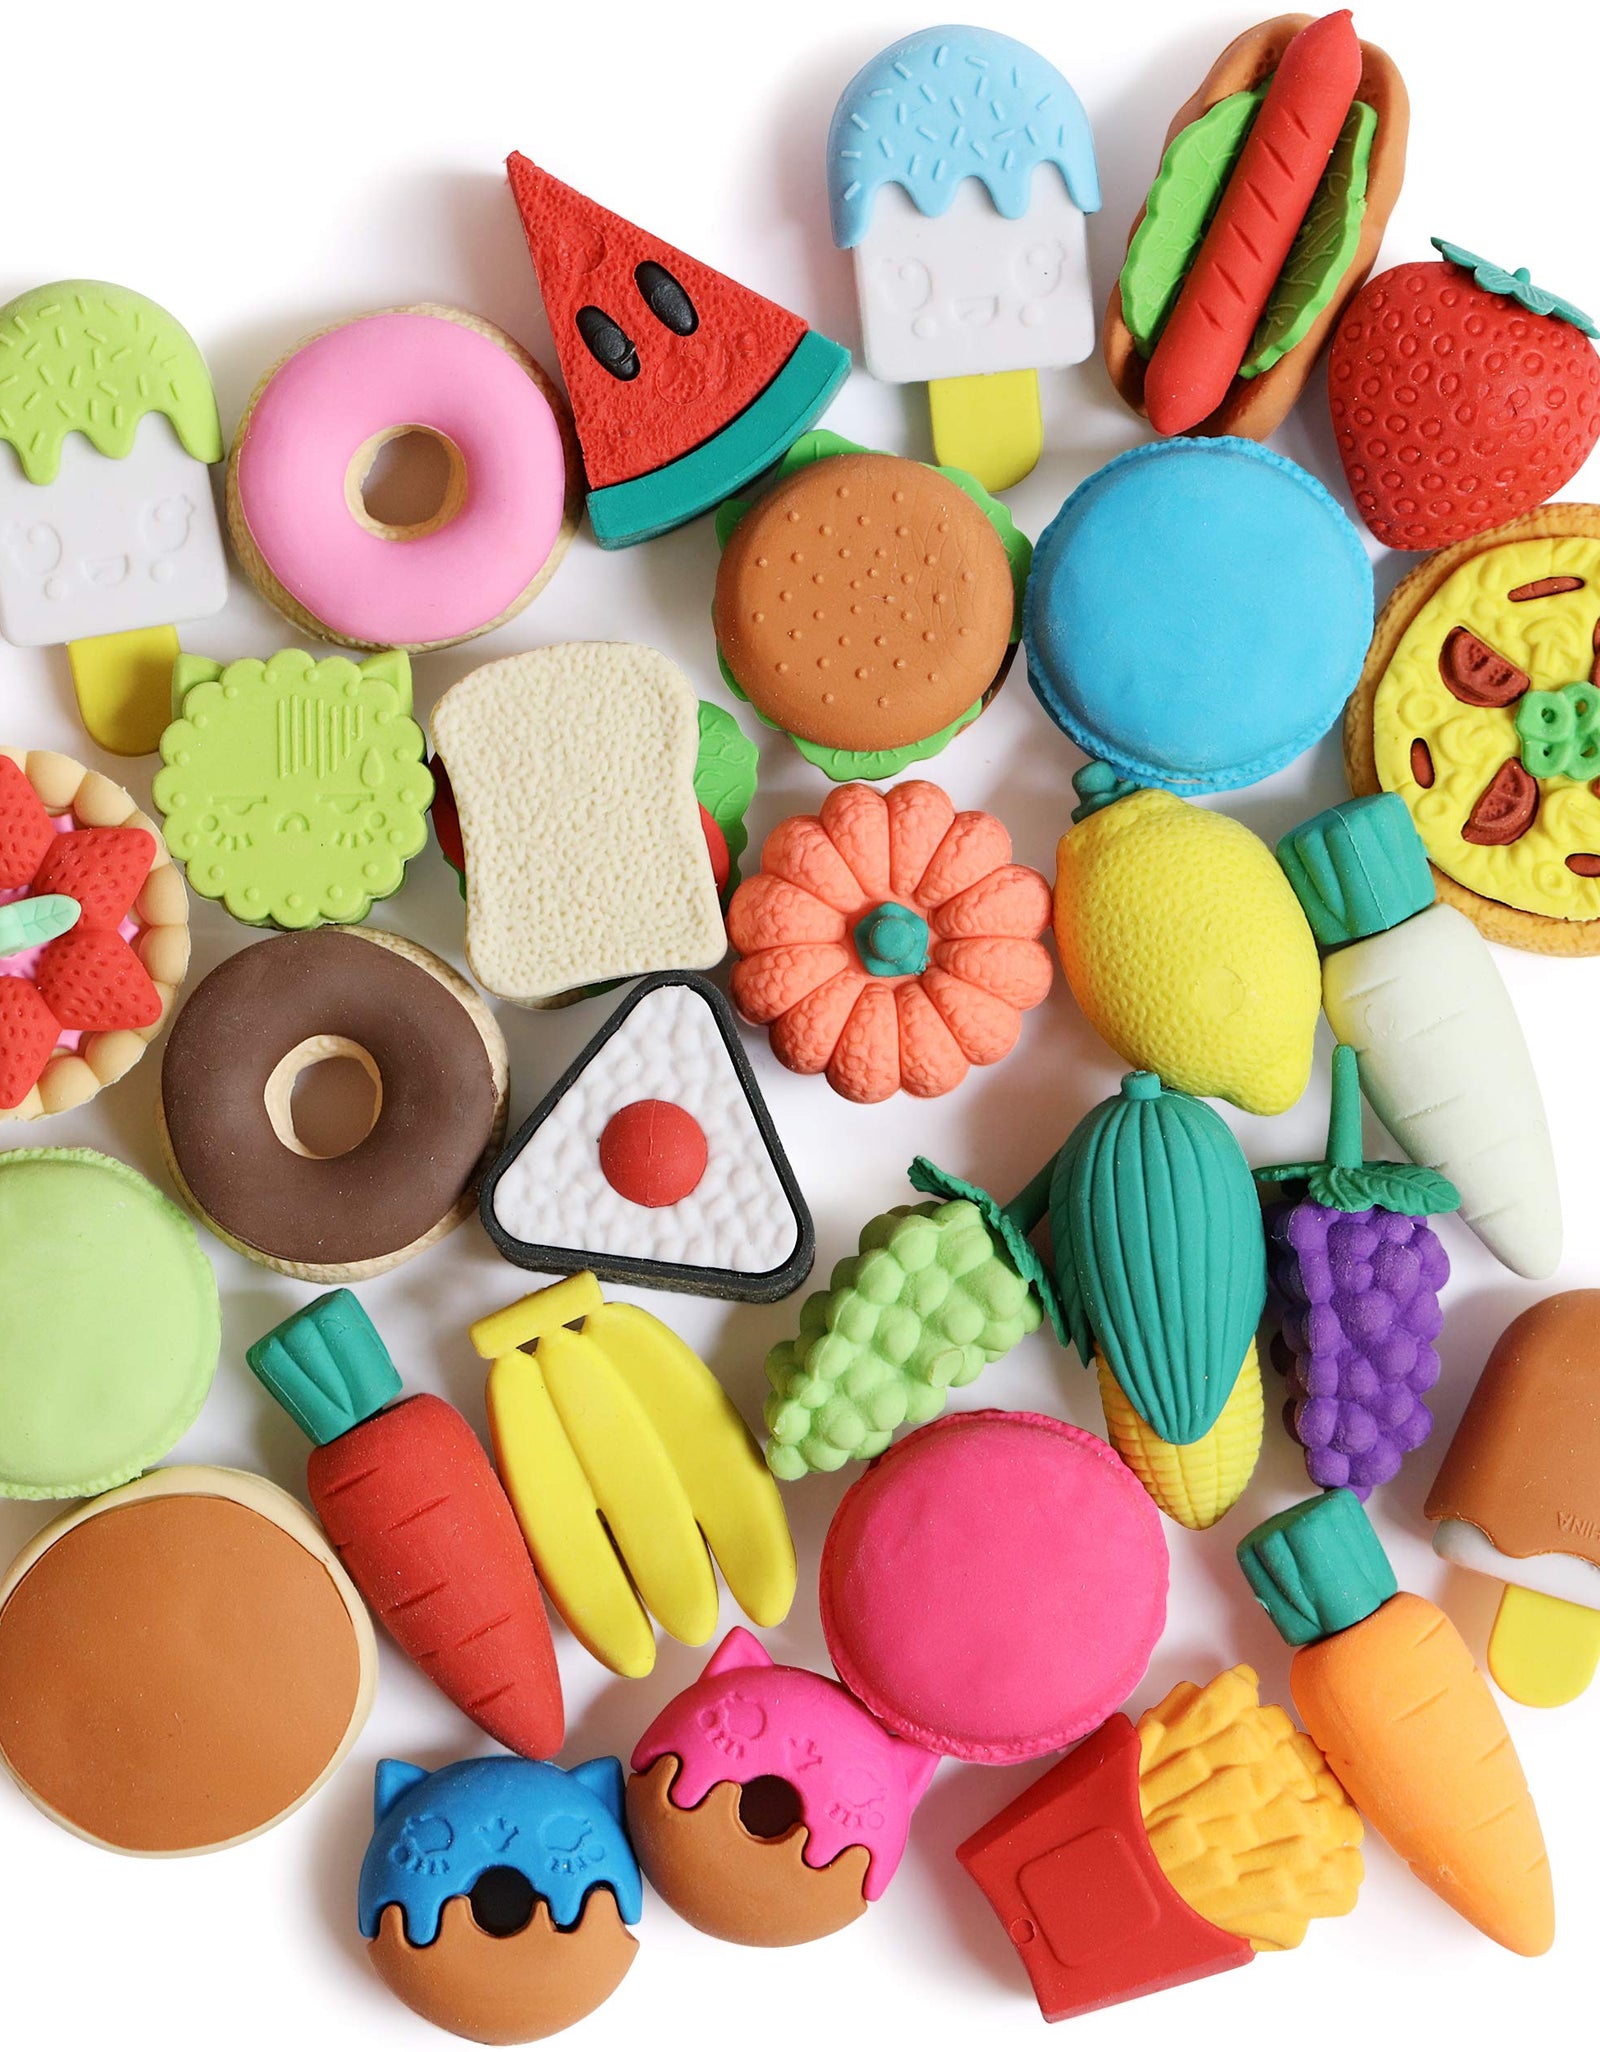 Mr. Pen- Food Erasers, Erasers, 30 Pack, Puzzle Erasers, Take Apart Erasers, Fruit Erasers, Pull Apart Erasers, Erasers for Kids, Fun Erasers, Gifts for Kids, Prizes for Kids Classroom, Pencil Erasers